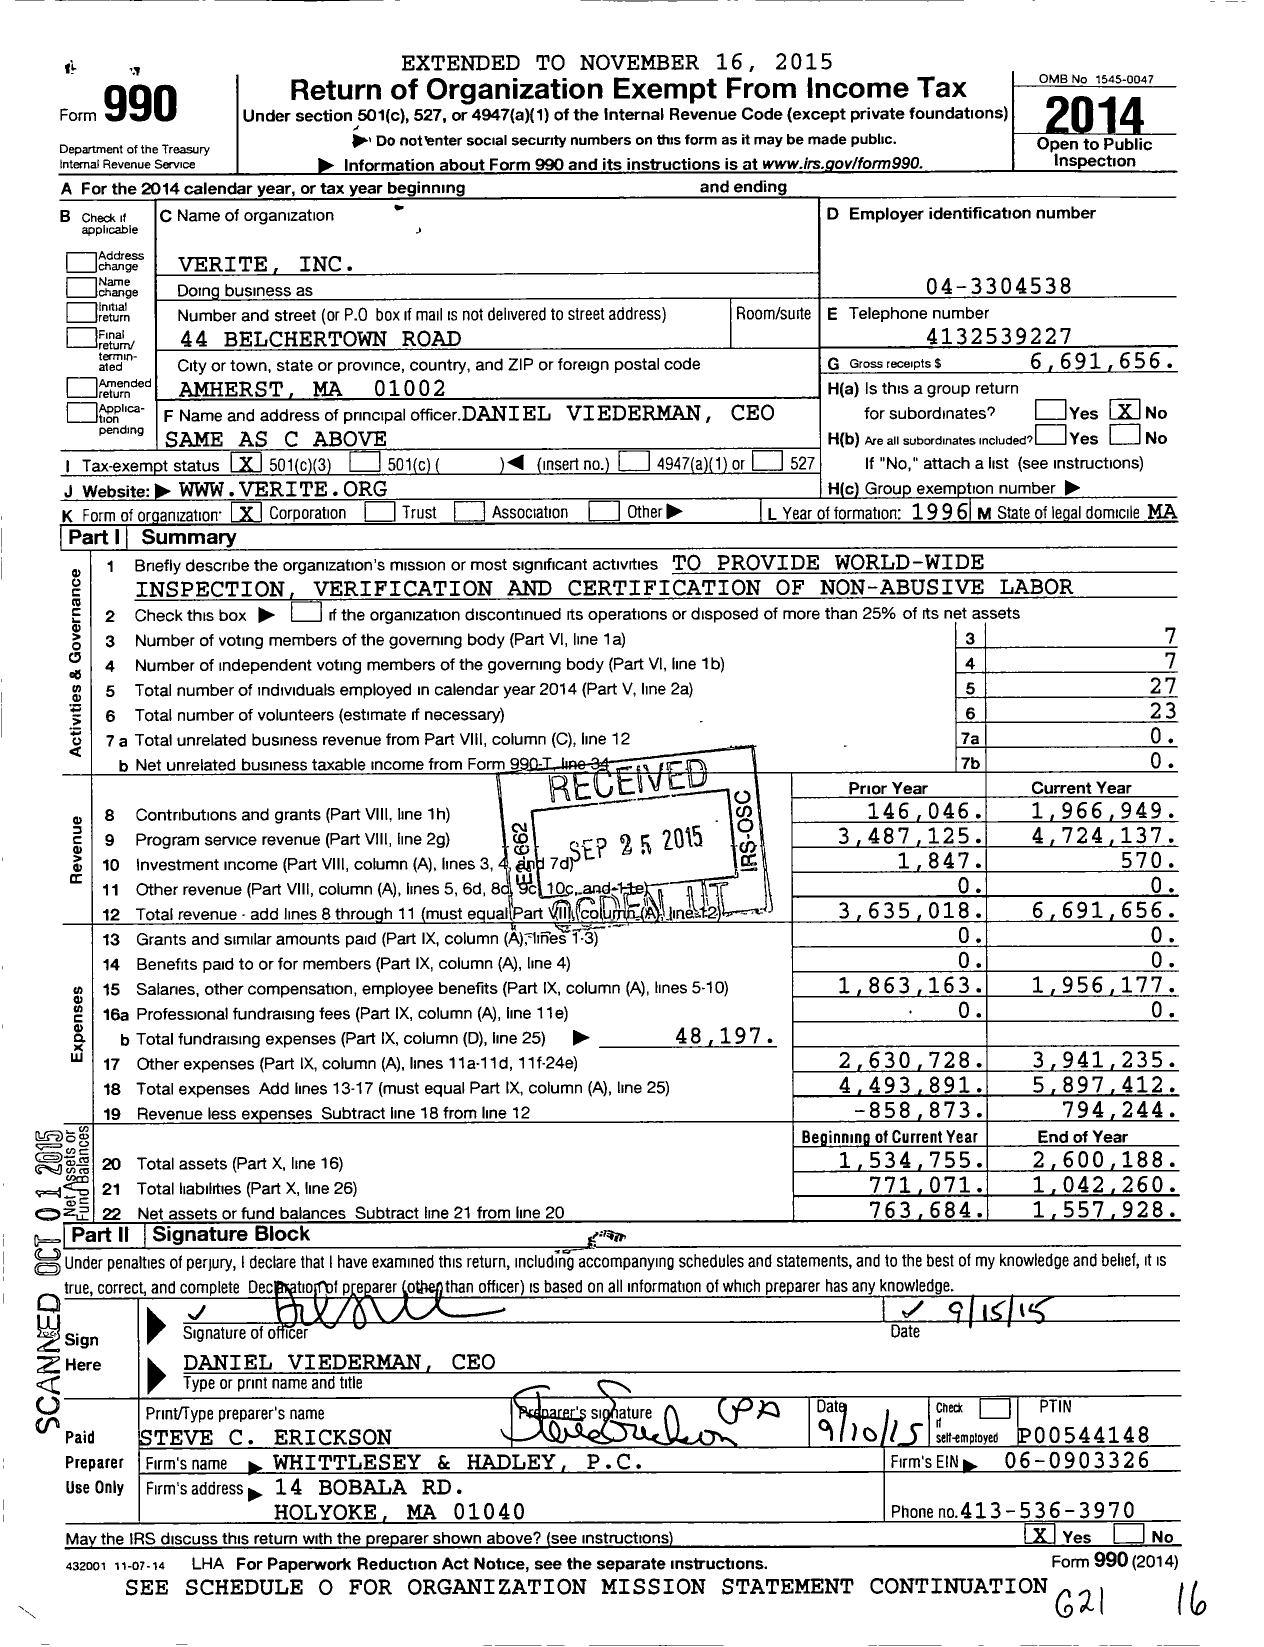 Image of first page of 2014 Form 990 for Verite